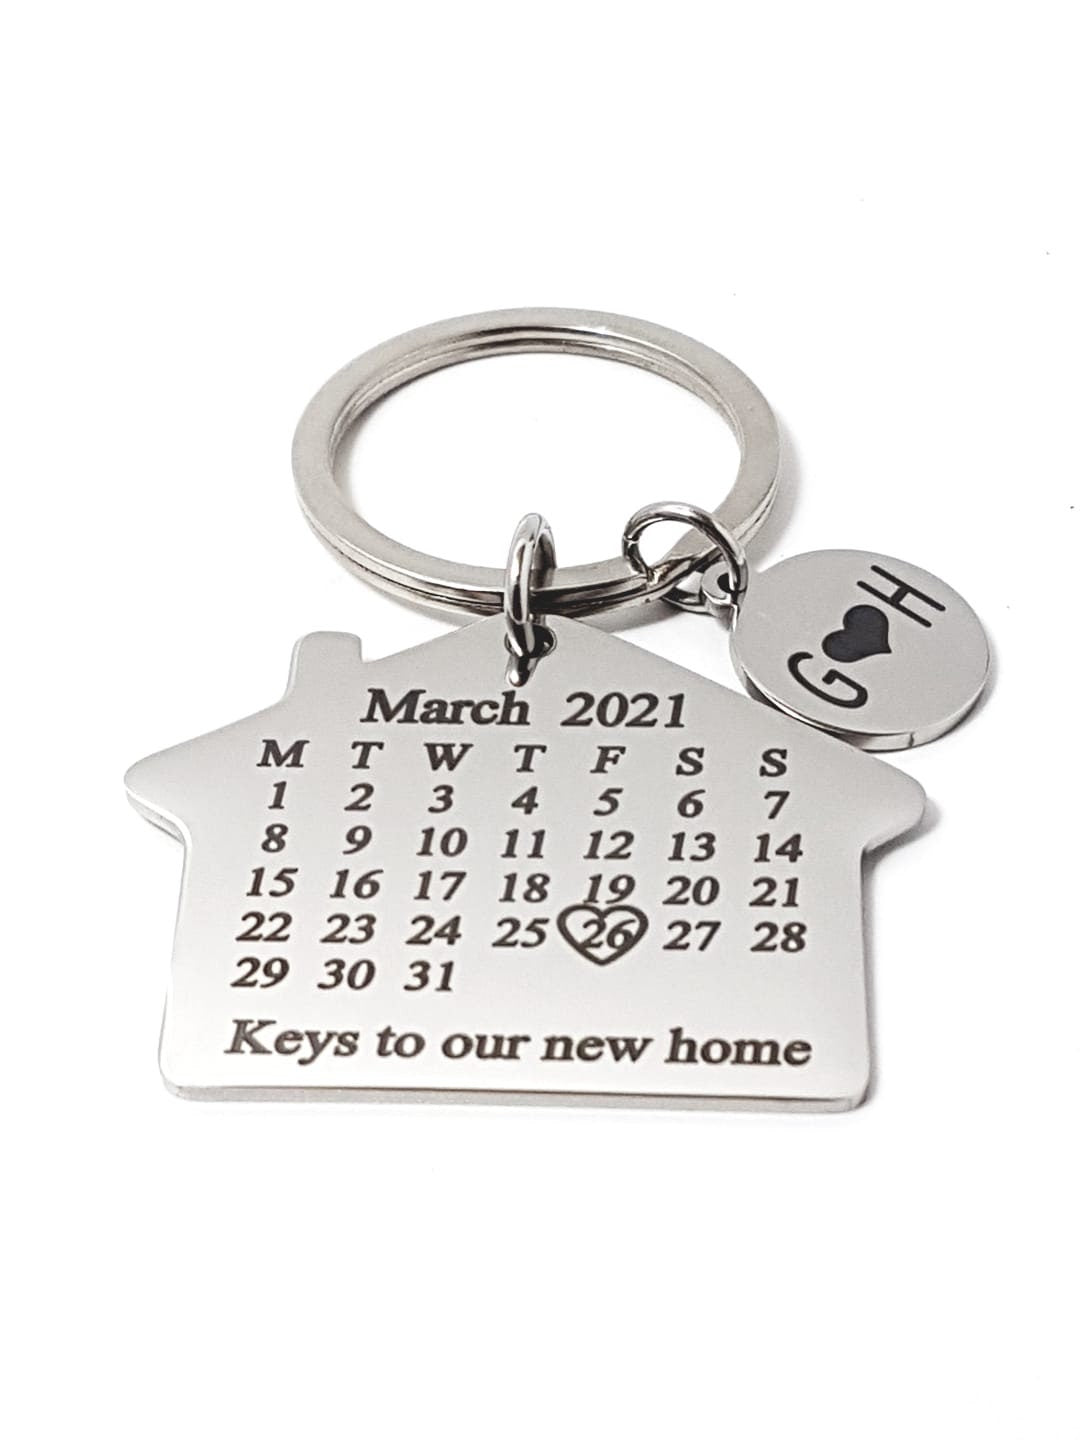 Personalised Keys to Our New Home Calendar Keyring